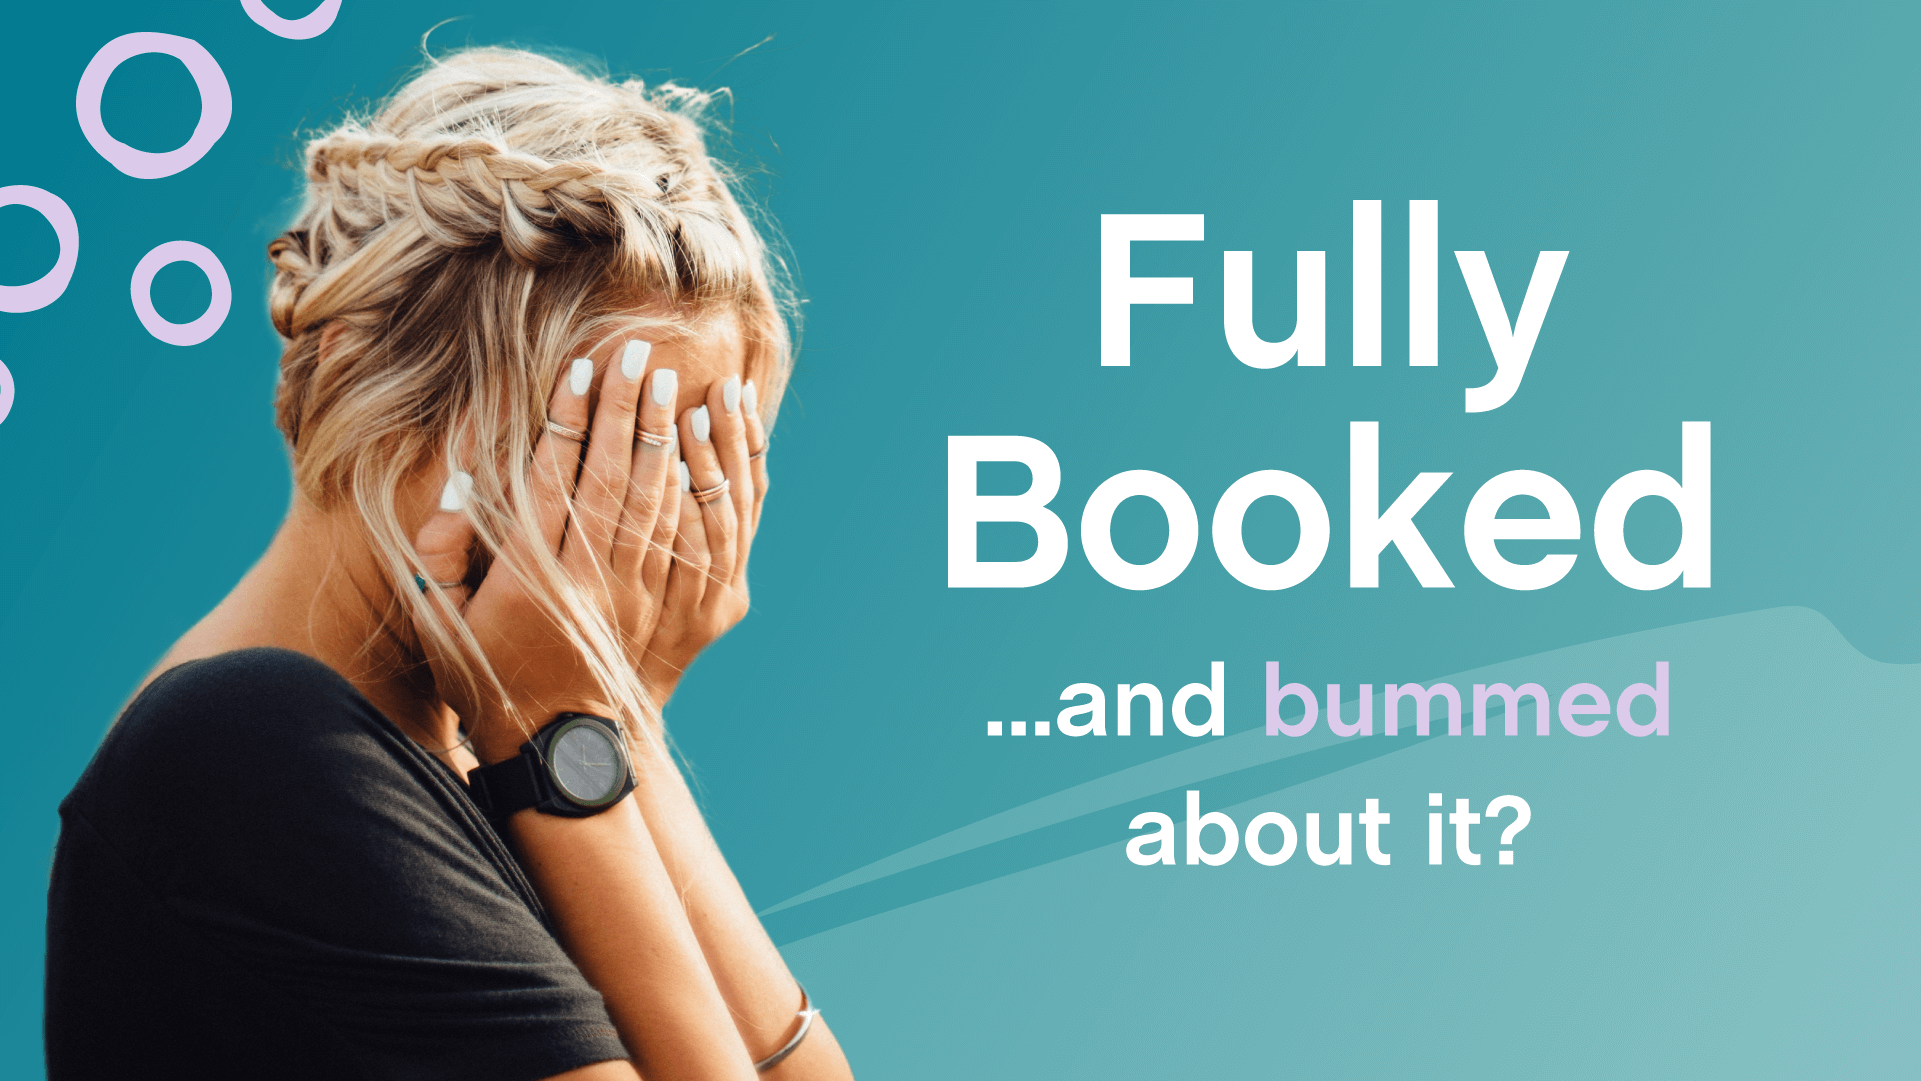 Should You Turn Down Clients When You’re Fully Booked?